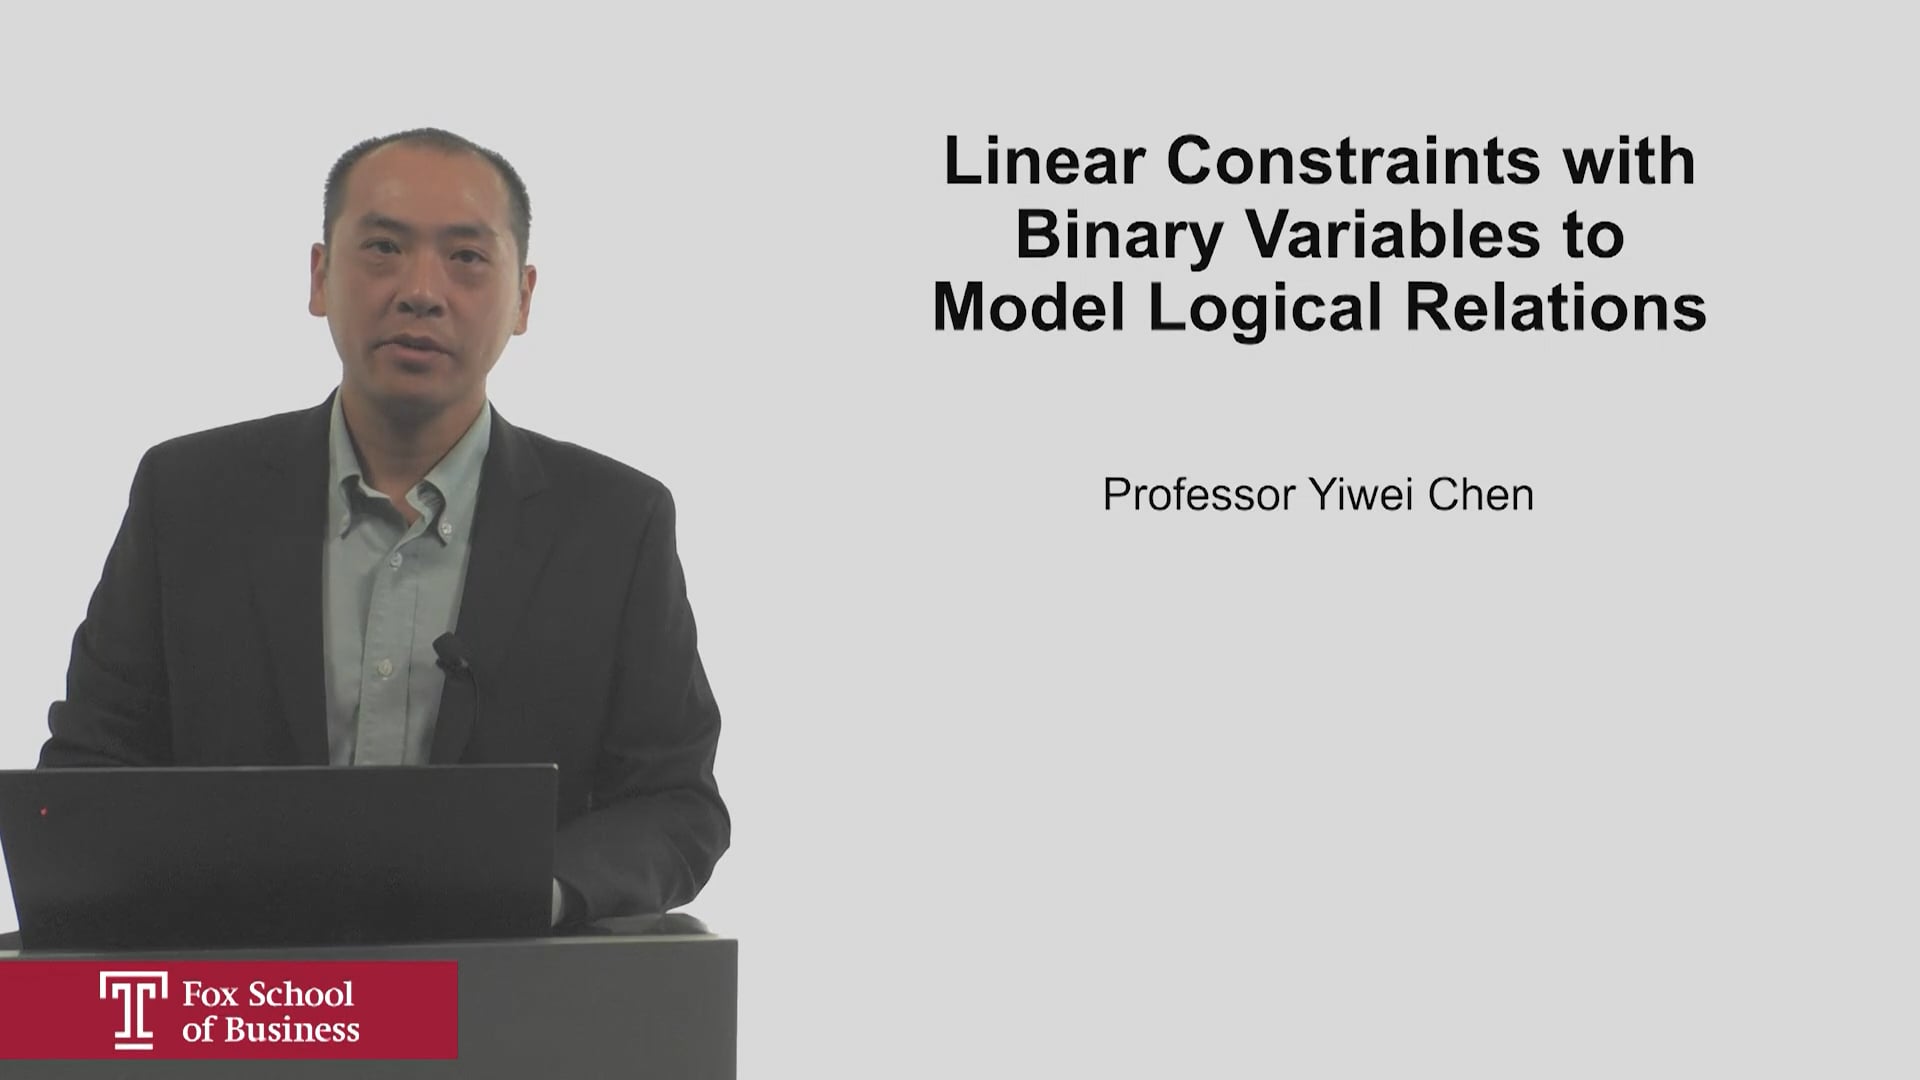 Linear Constraints with Binary Variables to Model Logical Relations